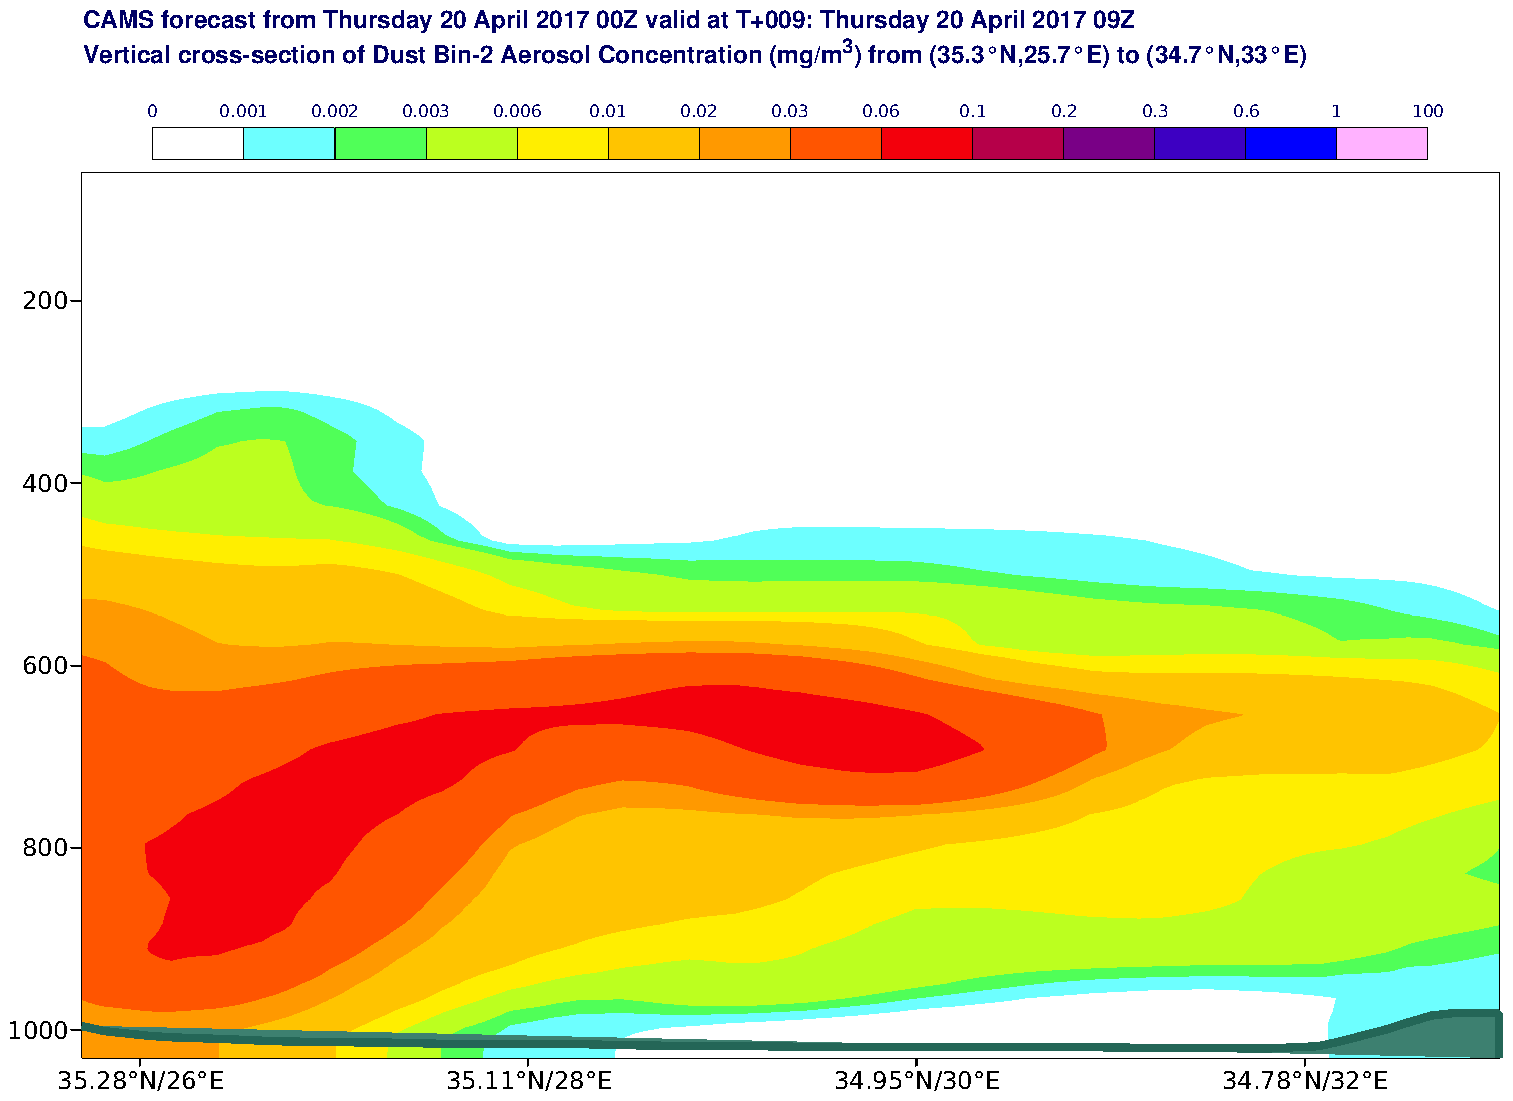 Vertical cross-section of Dust Bin-2 Aerosol Concentration (mg/m3) valid at T9 - 2017-04-20 09:00